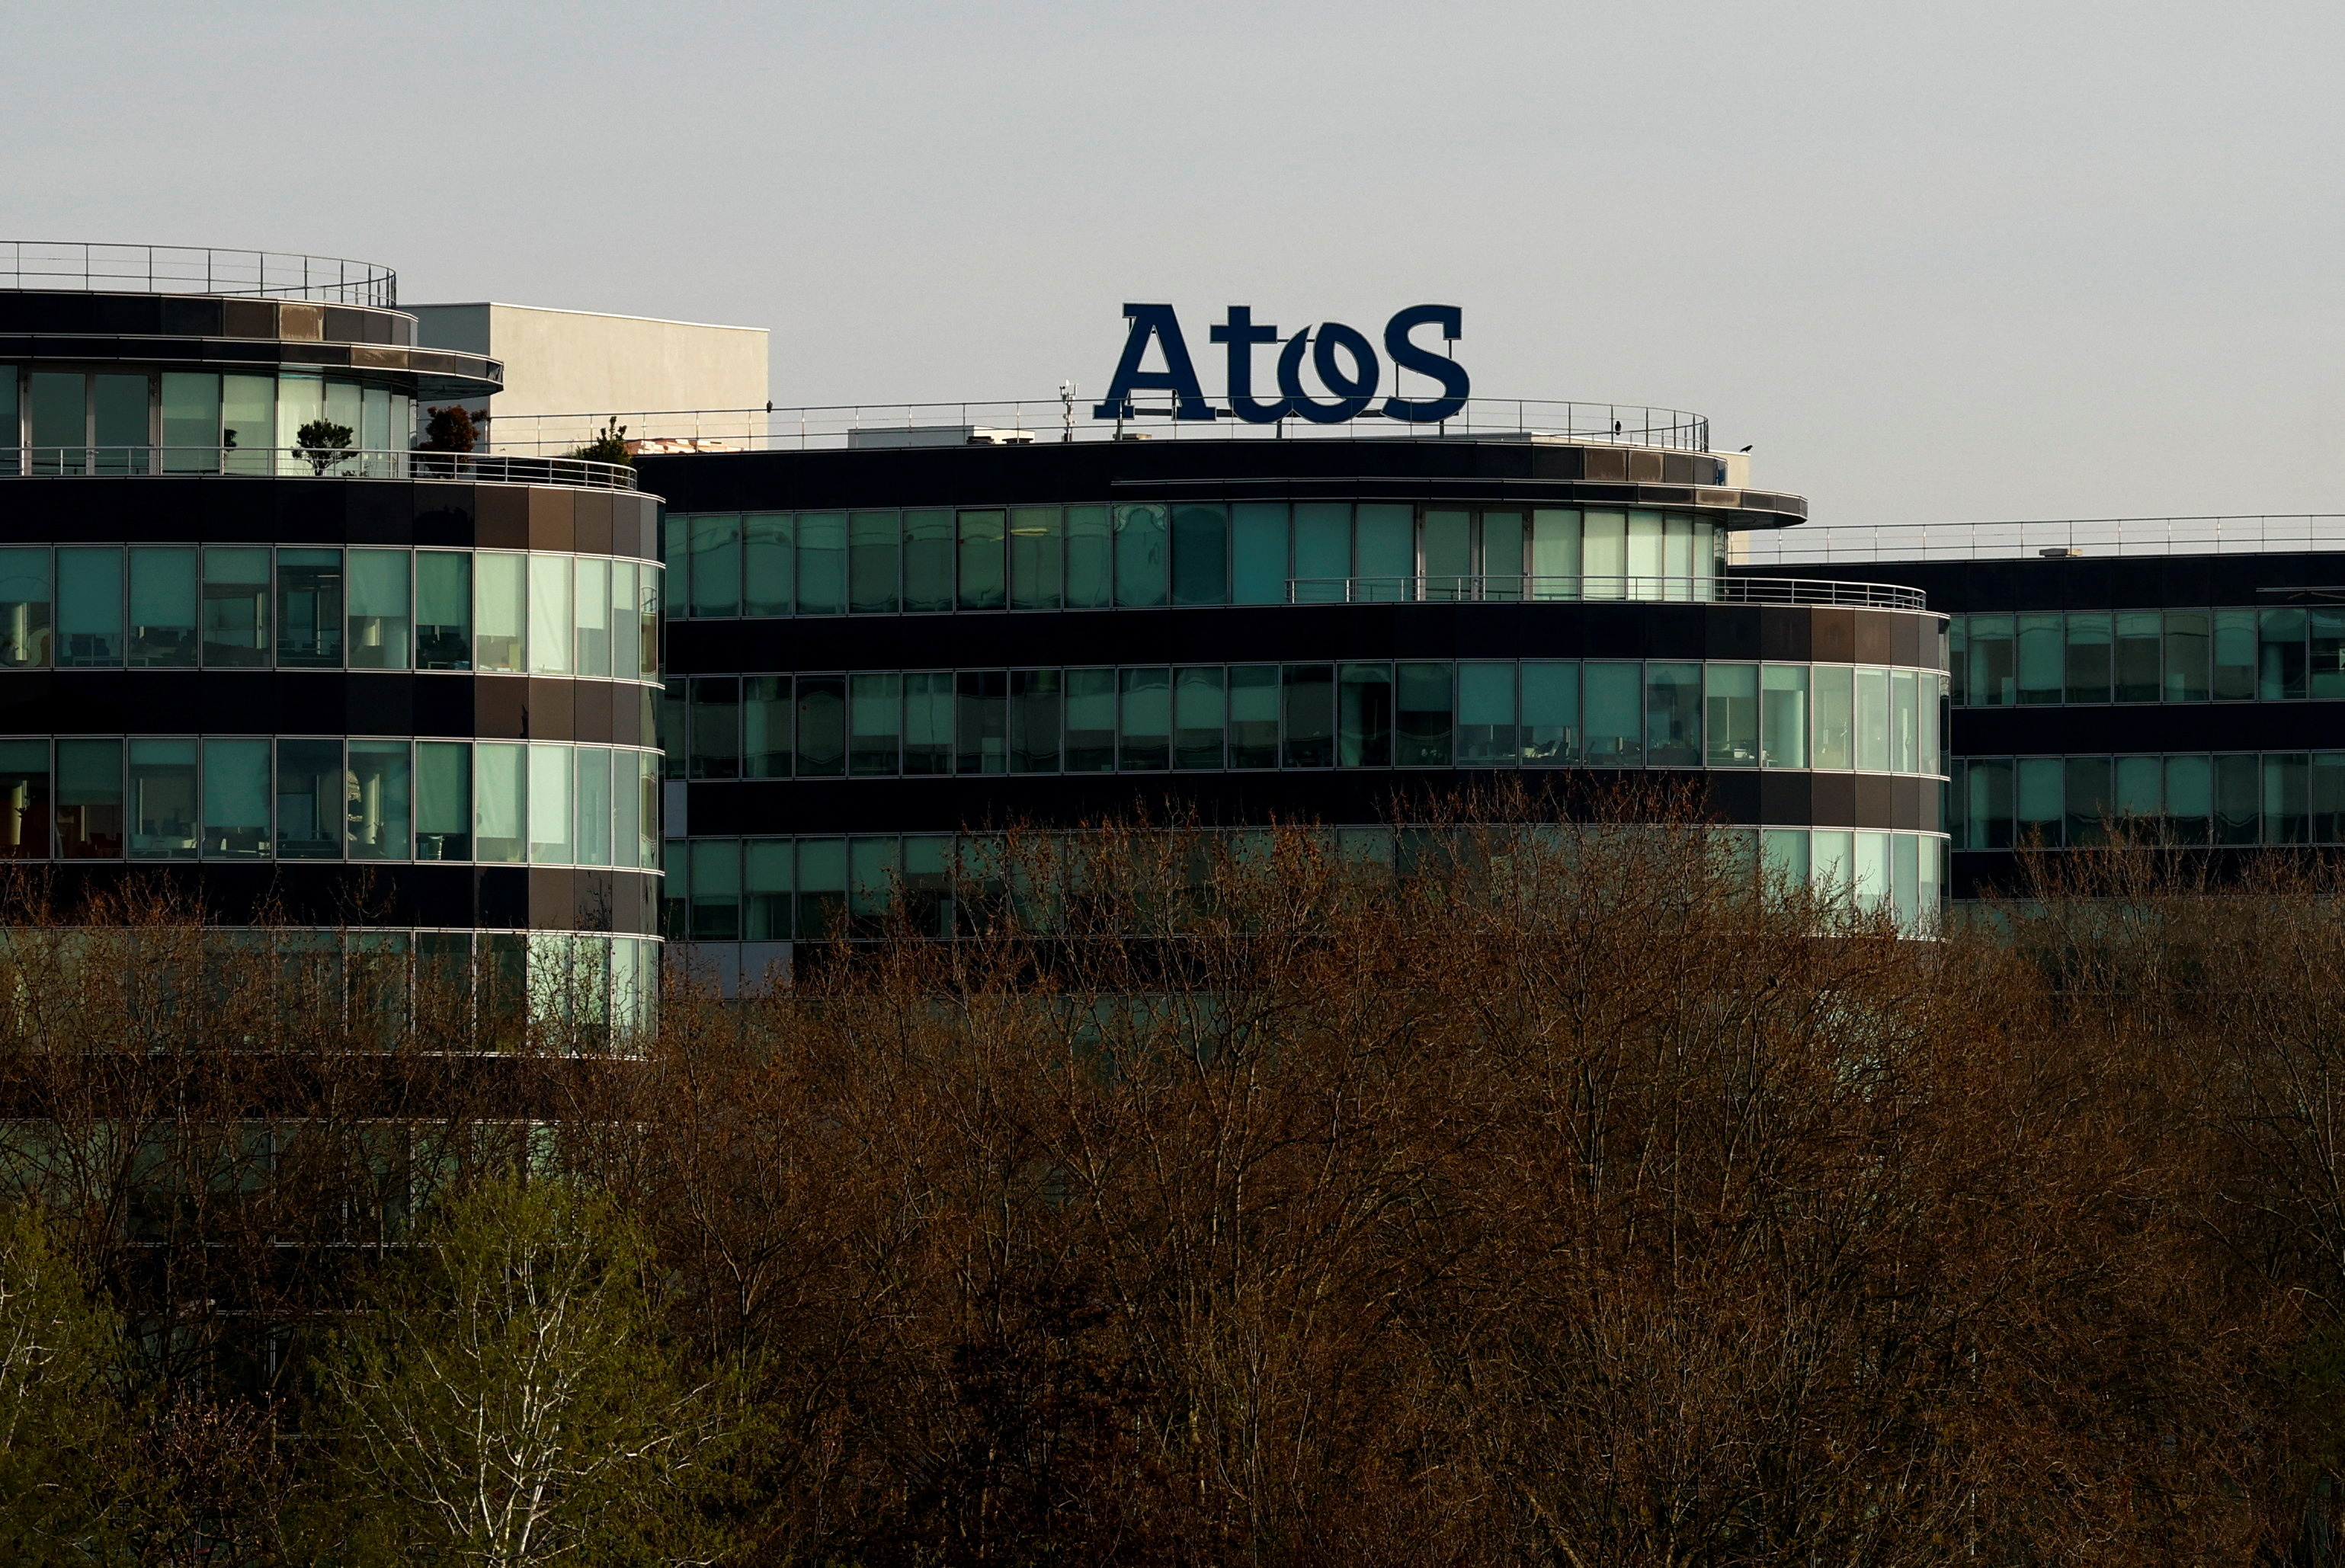 The logo of French IT consulting firm Atos is seen on a company building in Bezons near Paris